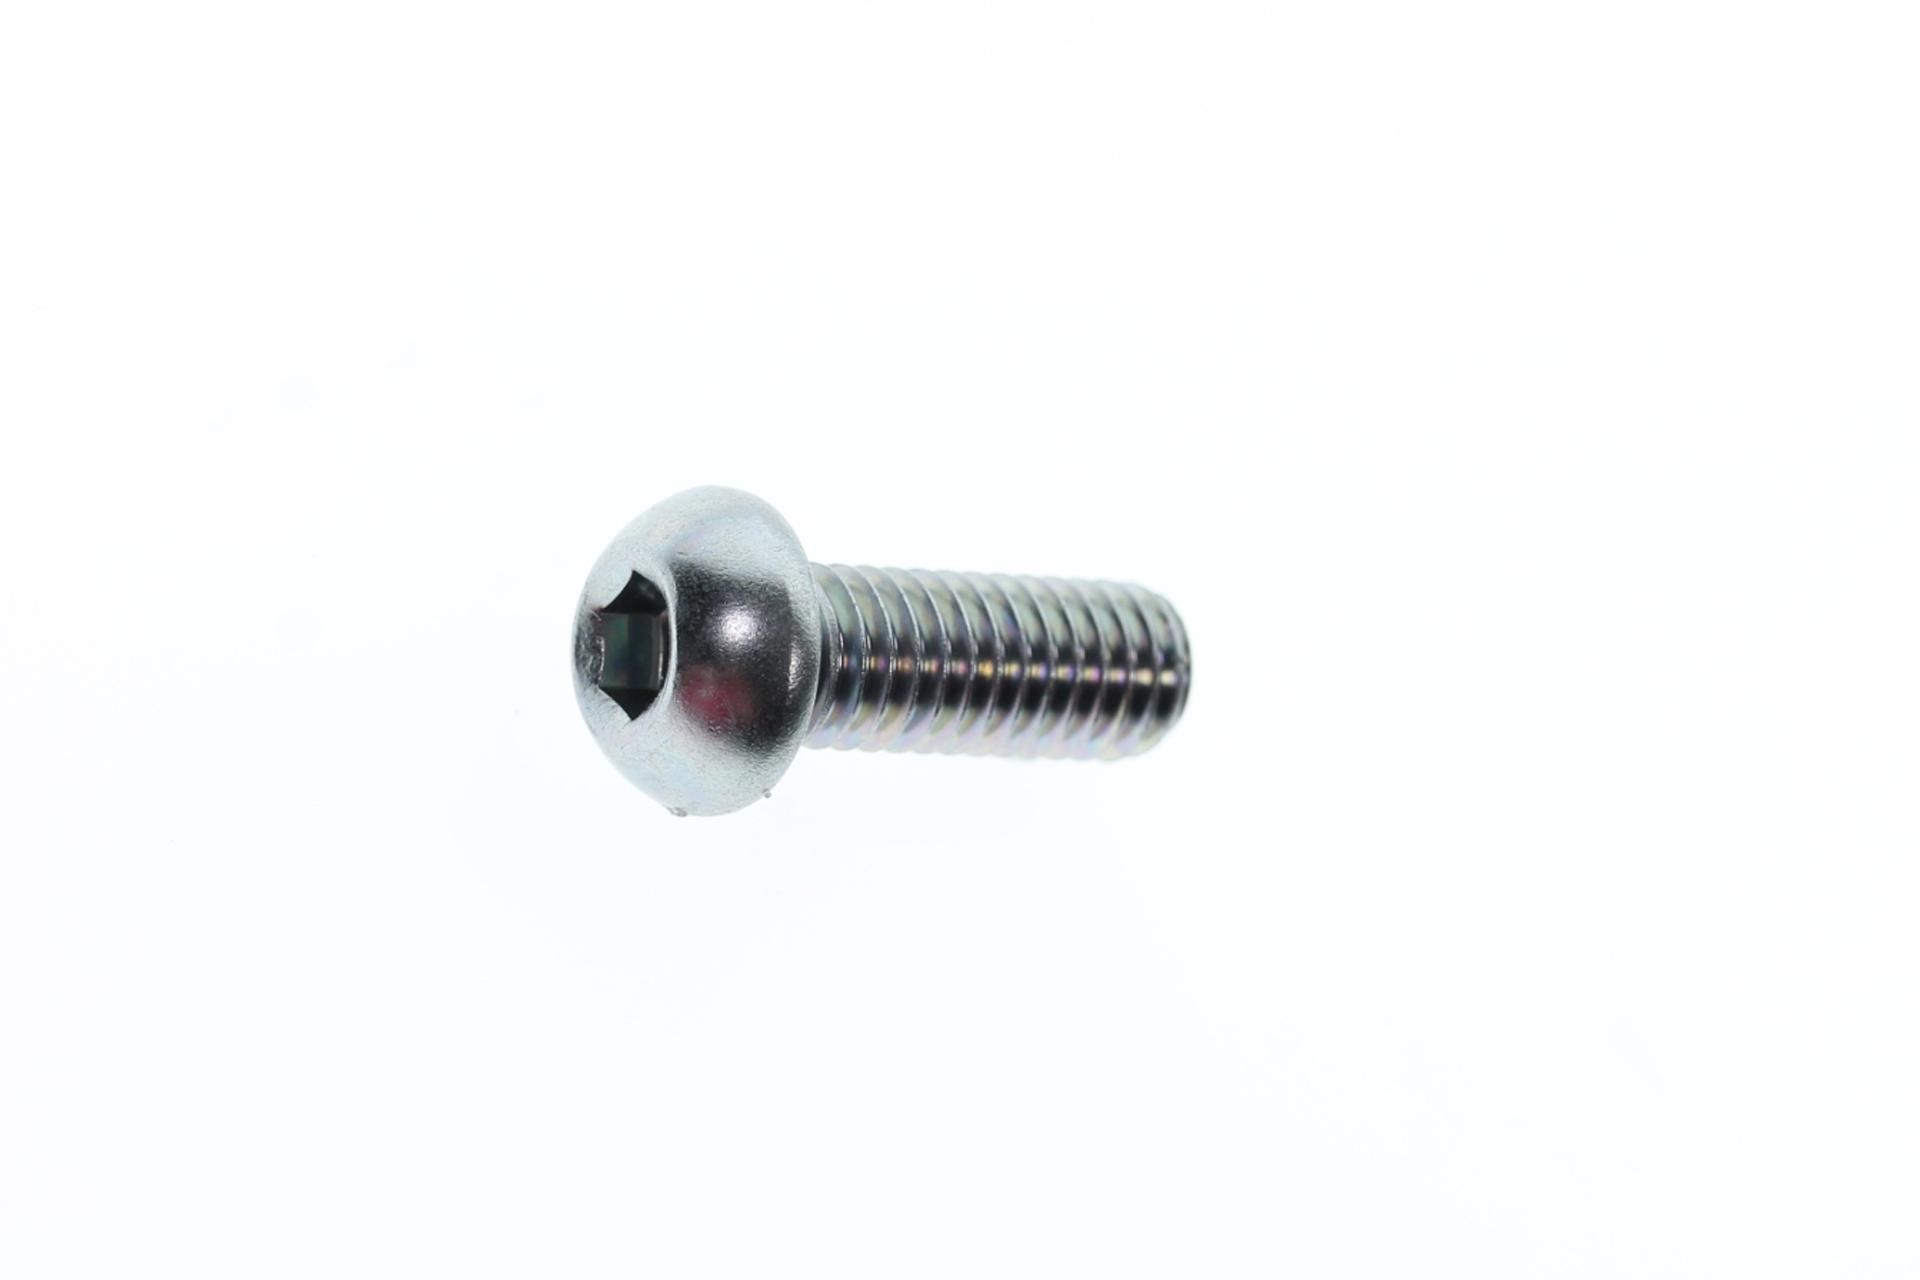 92011-06016-00 Superseded by 92014-06016-00 - BOLT, BUTTON HEAD